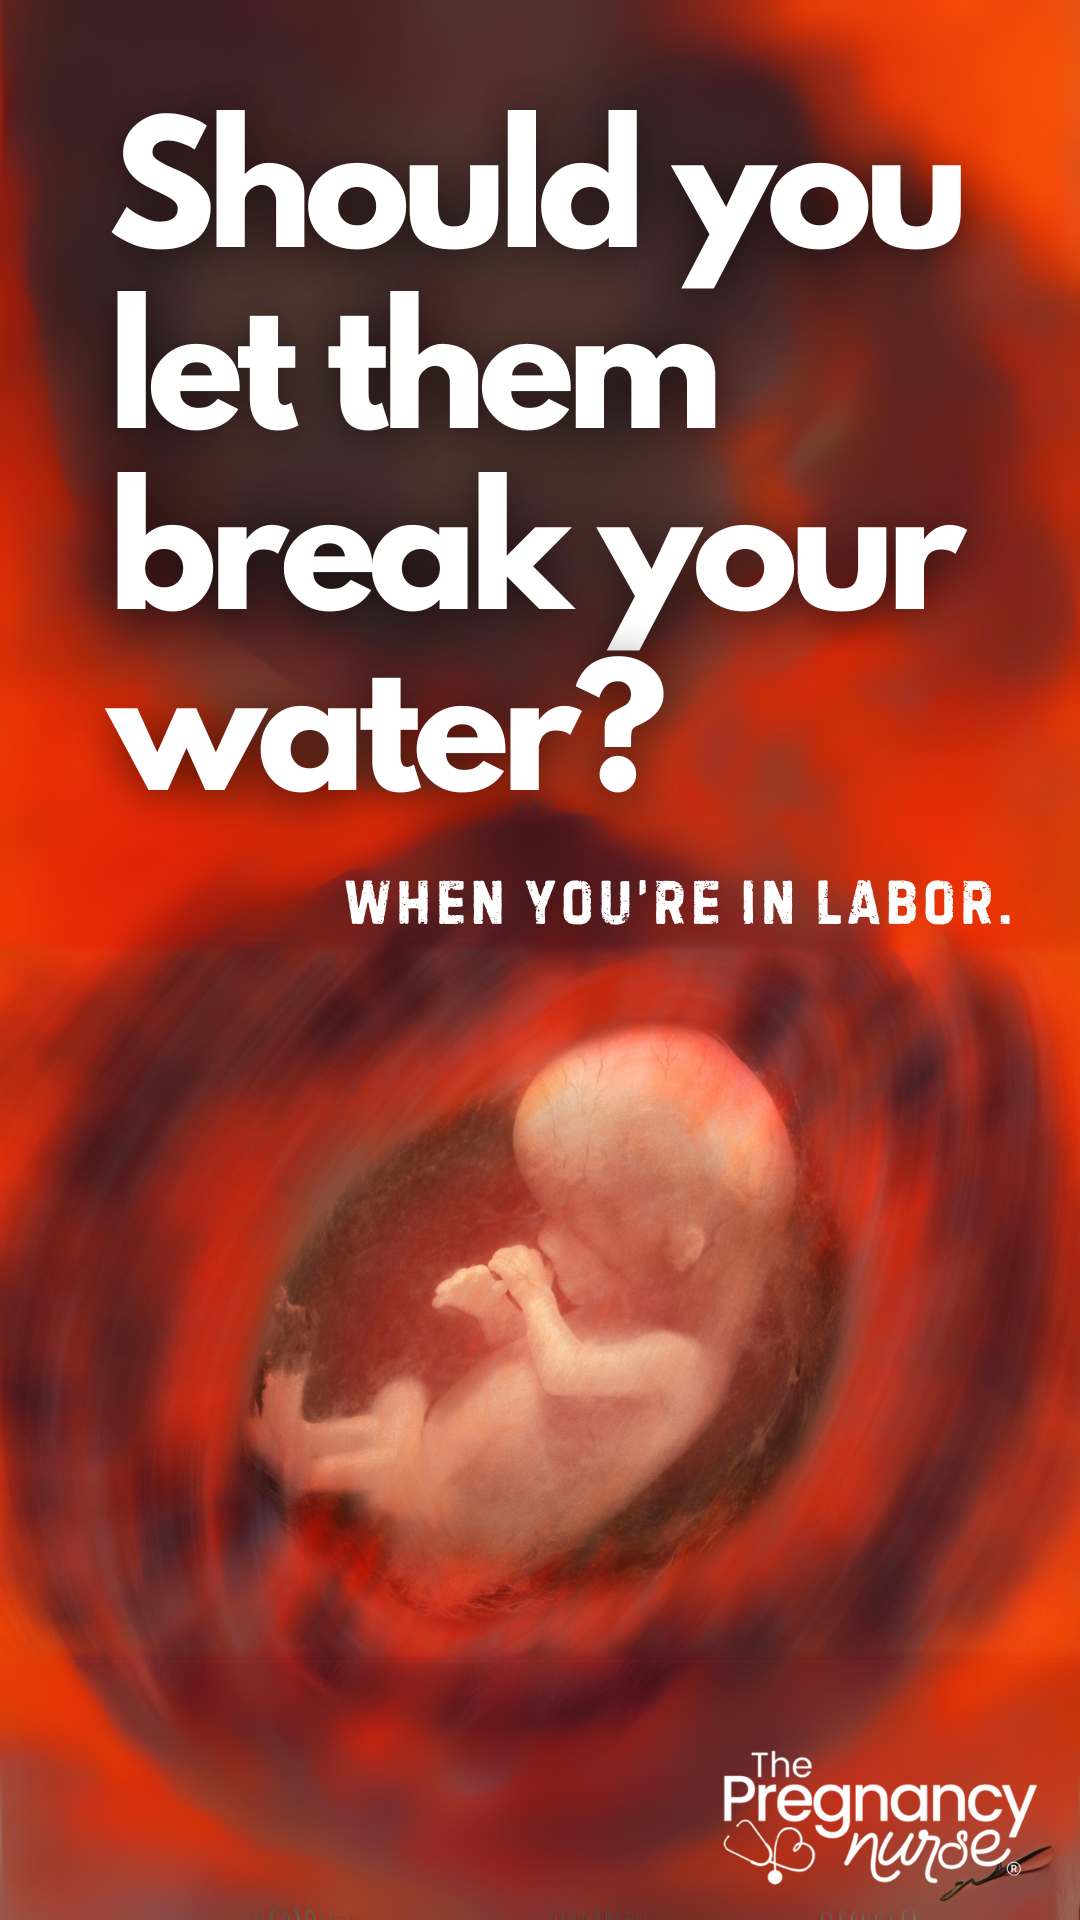 Explore the pros and cons of breaking water during labor. Discover the potential risks, benefits, and alternatives. Learn about the importance of informed consent and gain insights to make a choice that is right for you. Arm yourself with knowledge and tools to ensure a positive birthing experience.